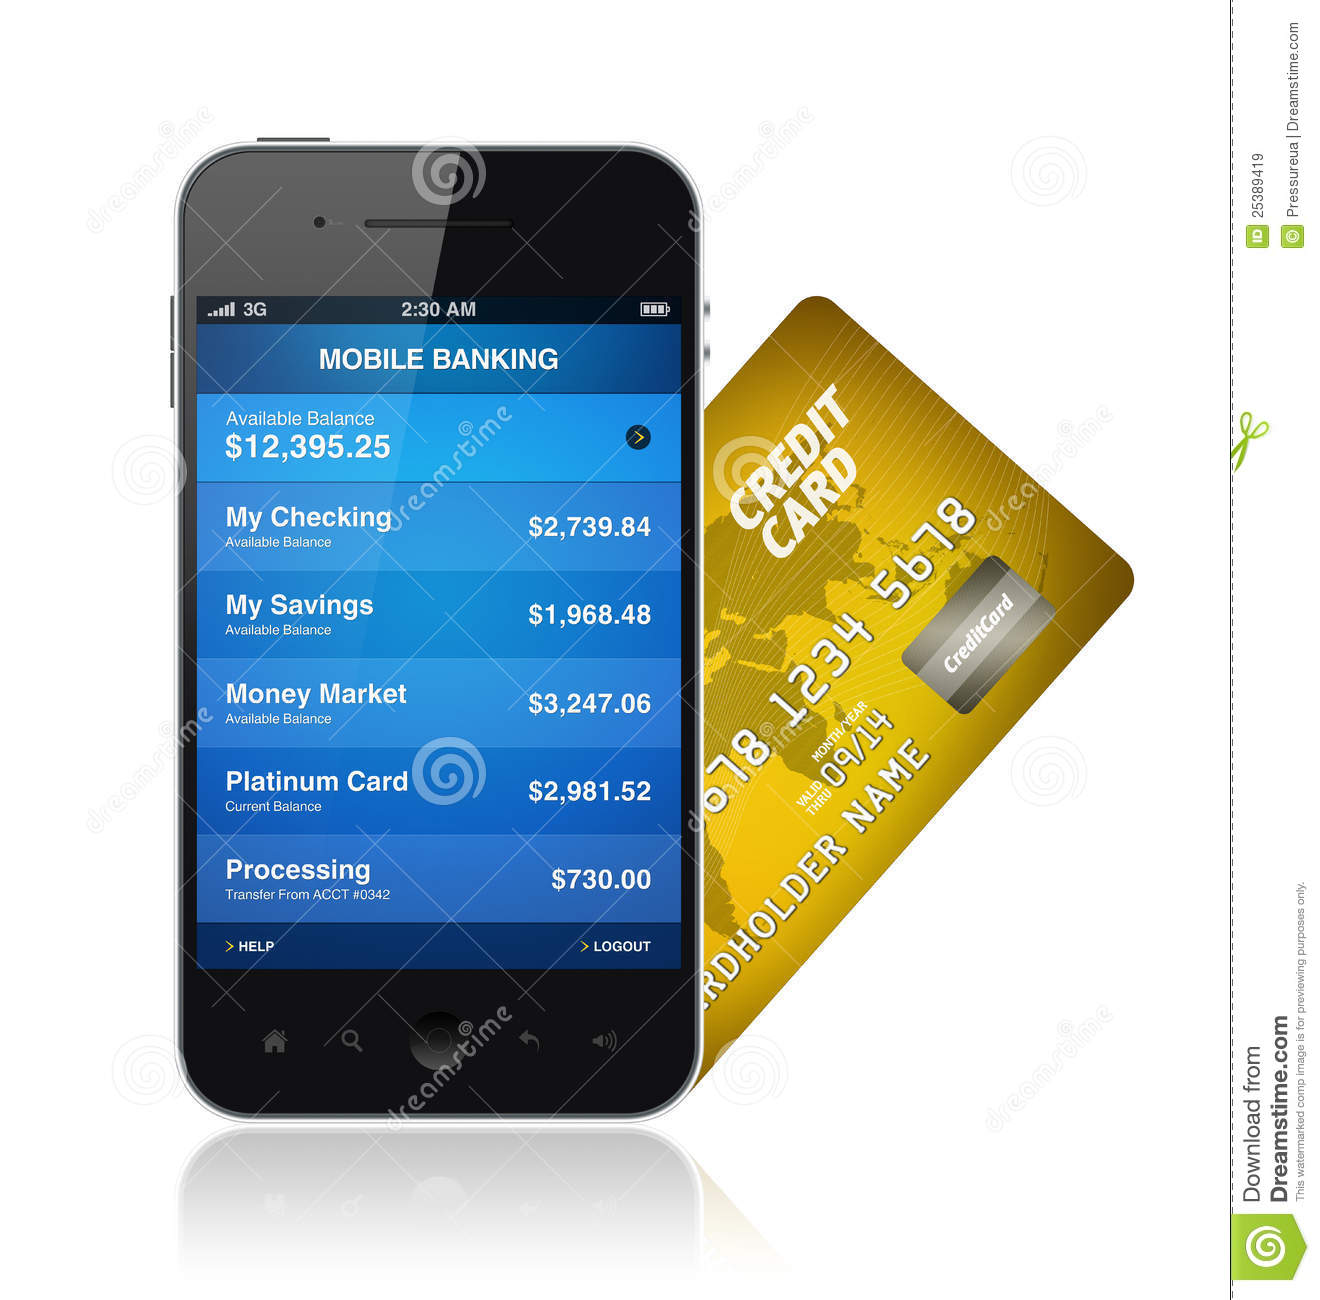 Illustration Of Mobile Banking Application On A Modern Mobile Phone